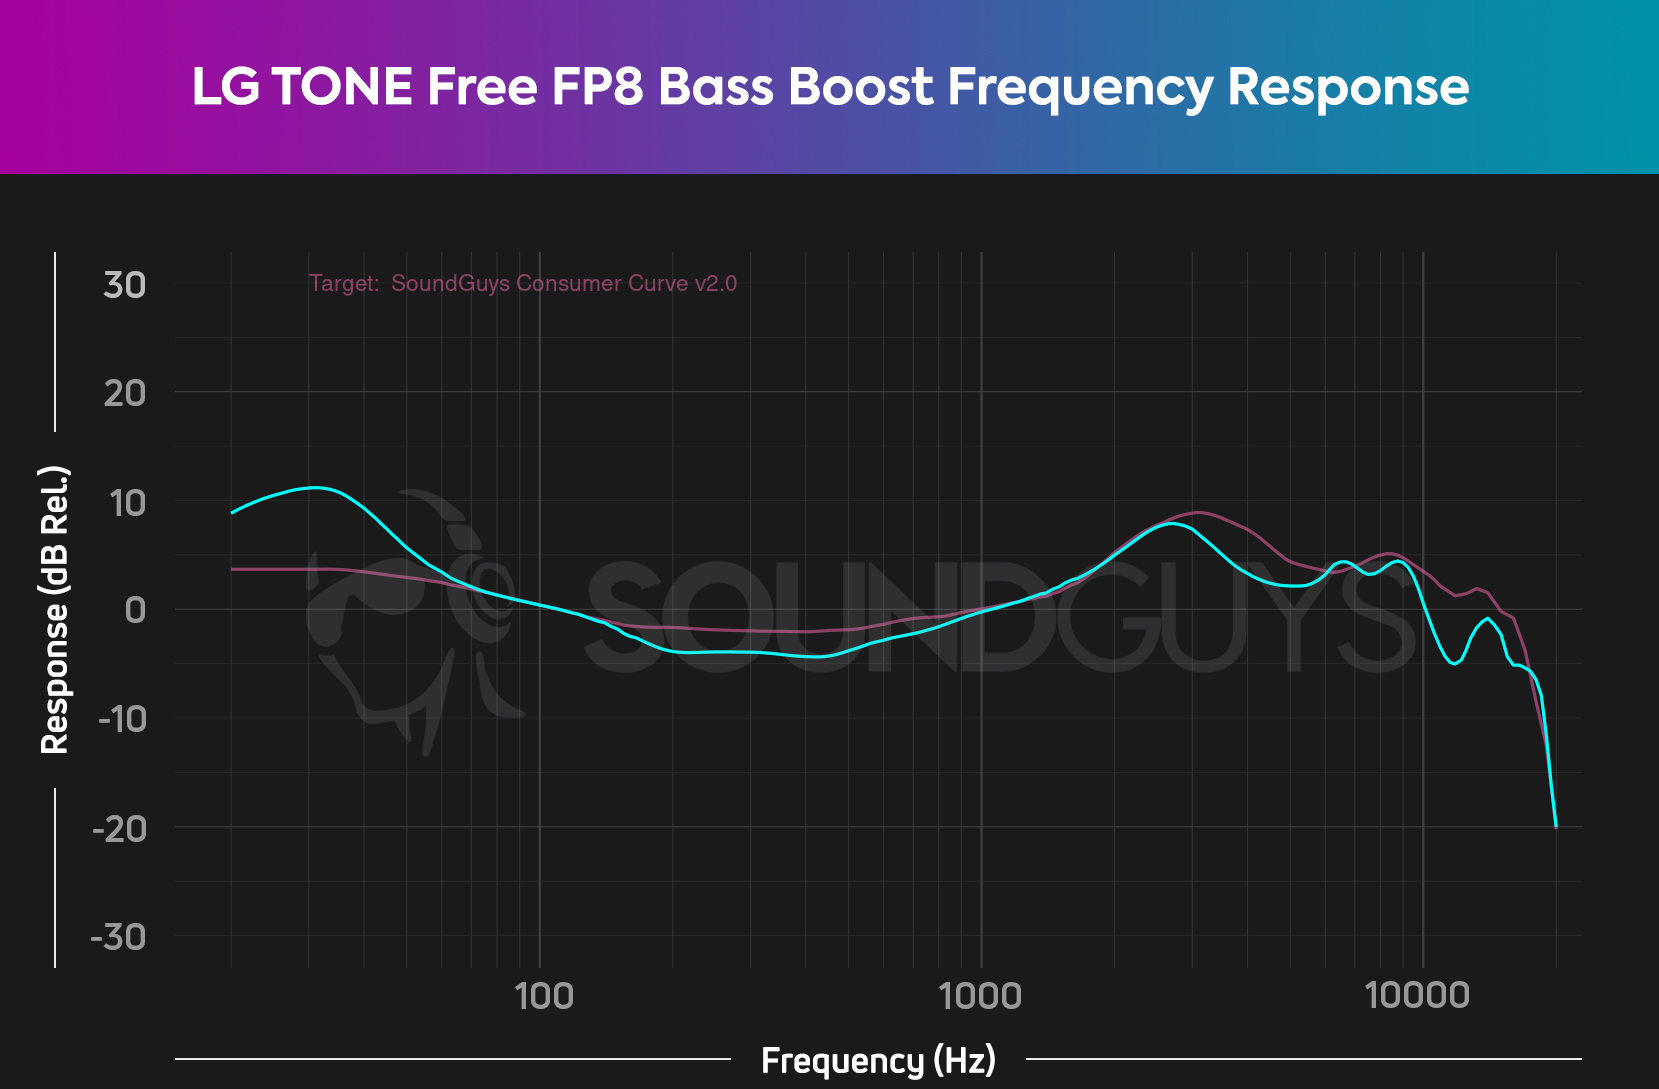 Frequency response graph of the Bass Boost EQ for the LG TONE Free FP8 as measured against the house curve.